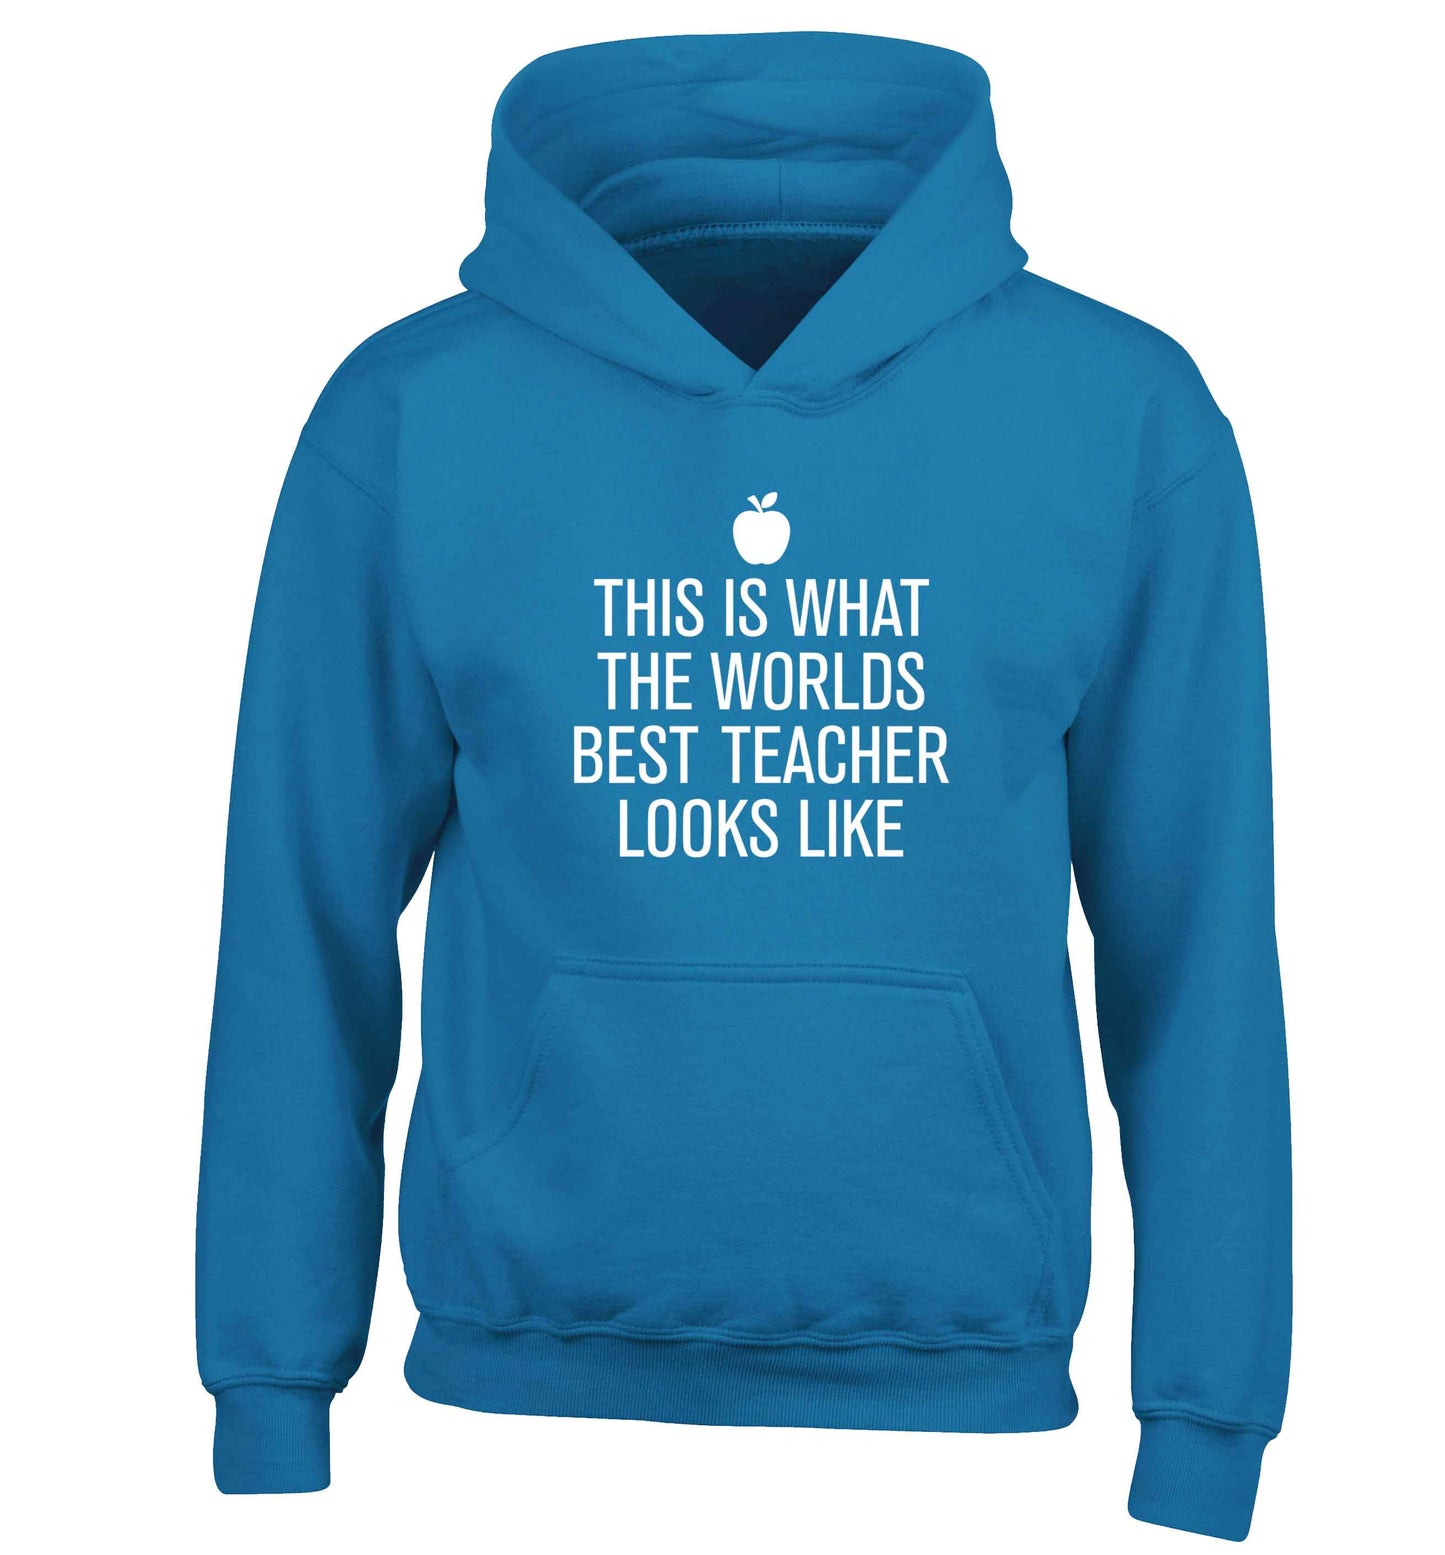 This is what the worlds best teacher looks like children's blue hoodie 12-13 Years